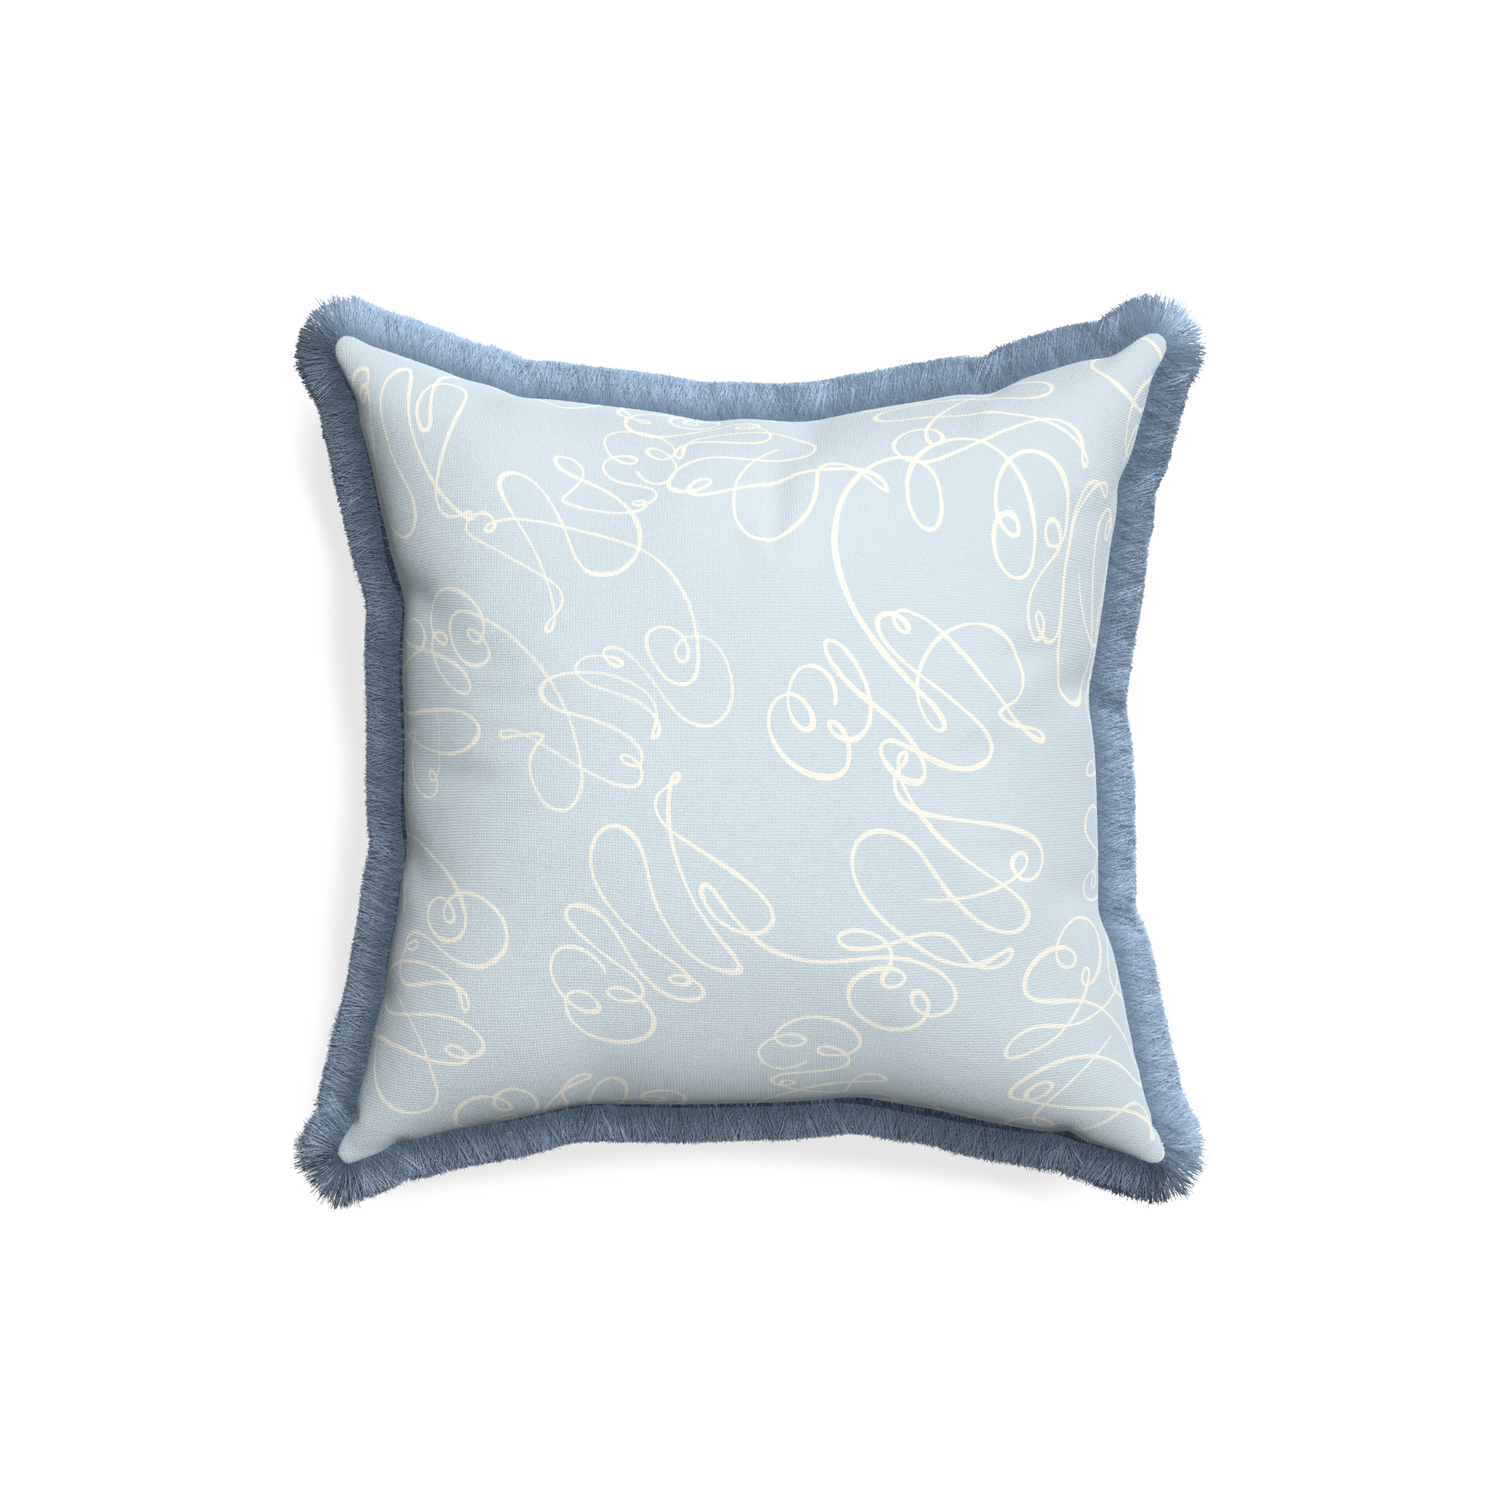 18-square mirabella custom powder blue abstractpillow with sky fringe on white background